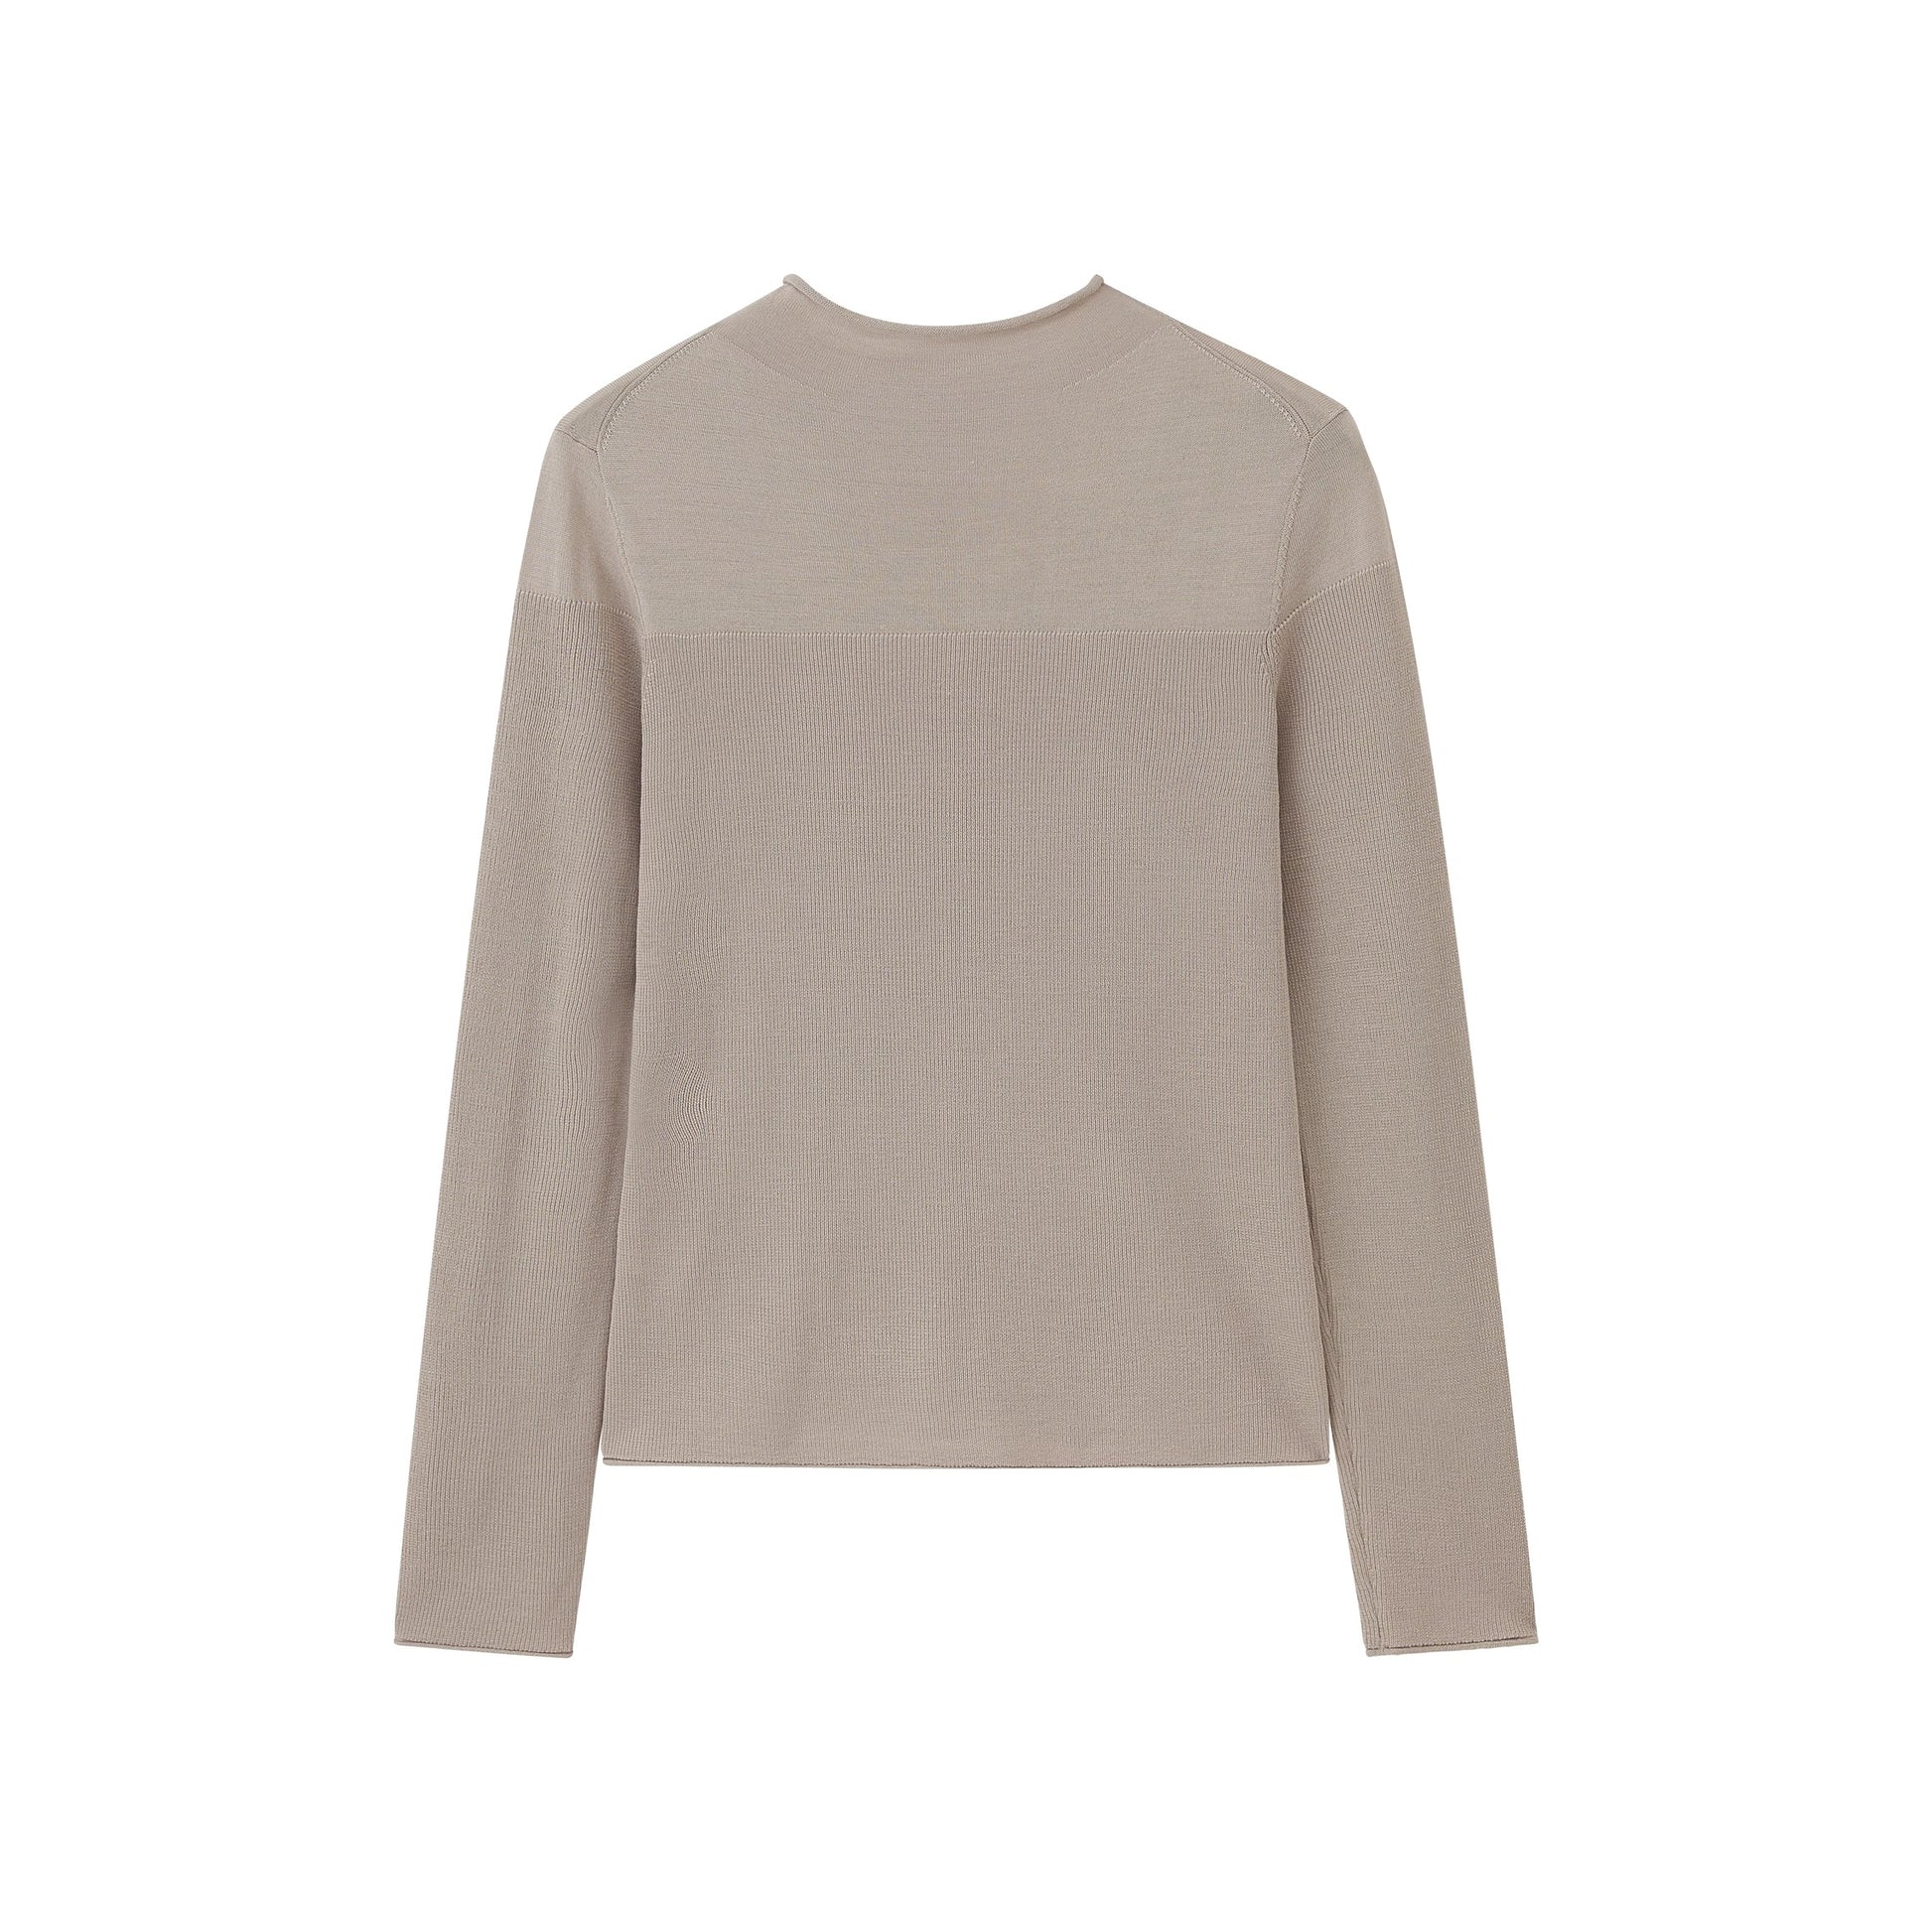 COS Waisted Mock-Neck T-Shirt in BEIGE